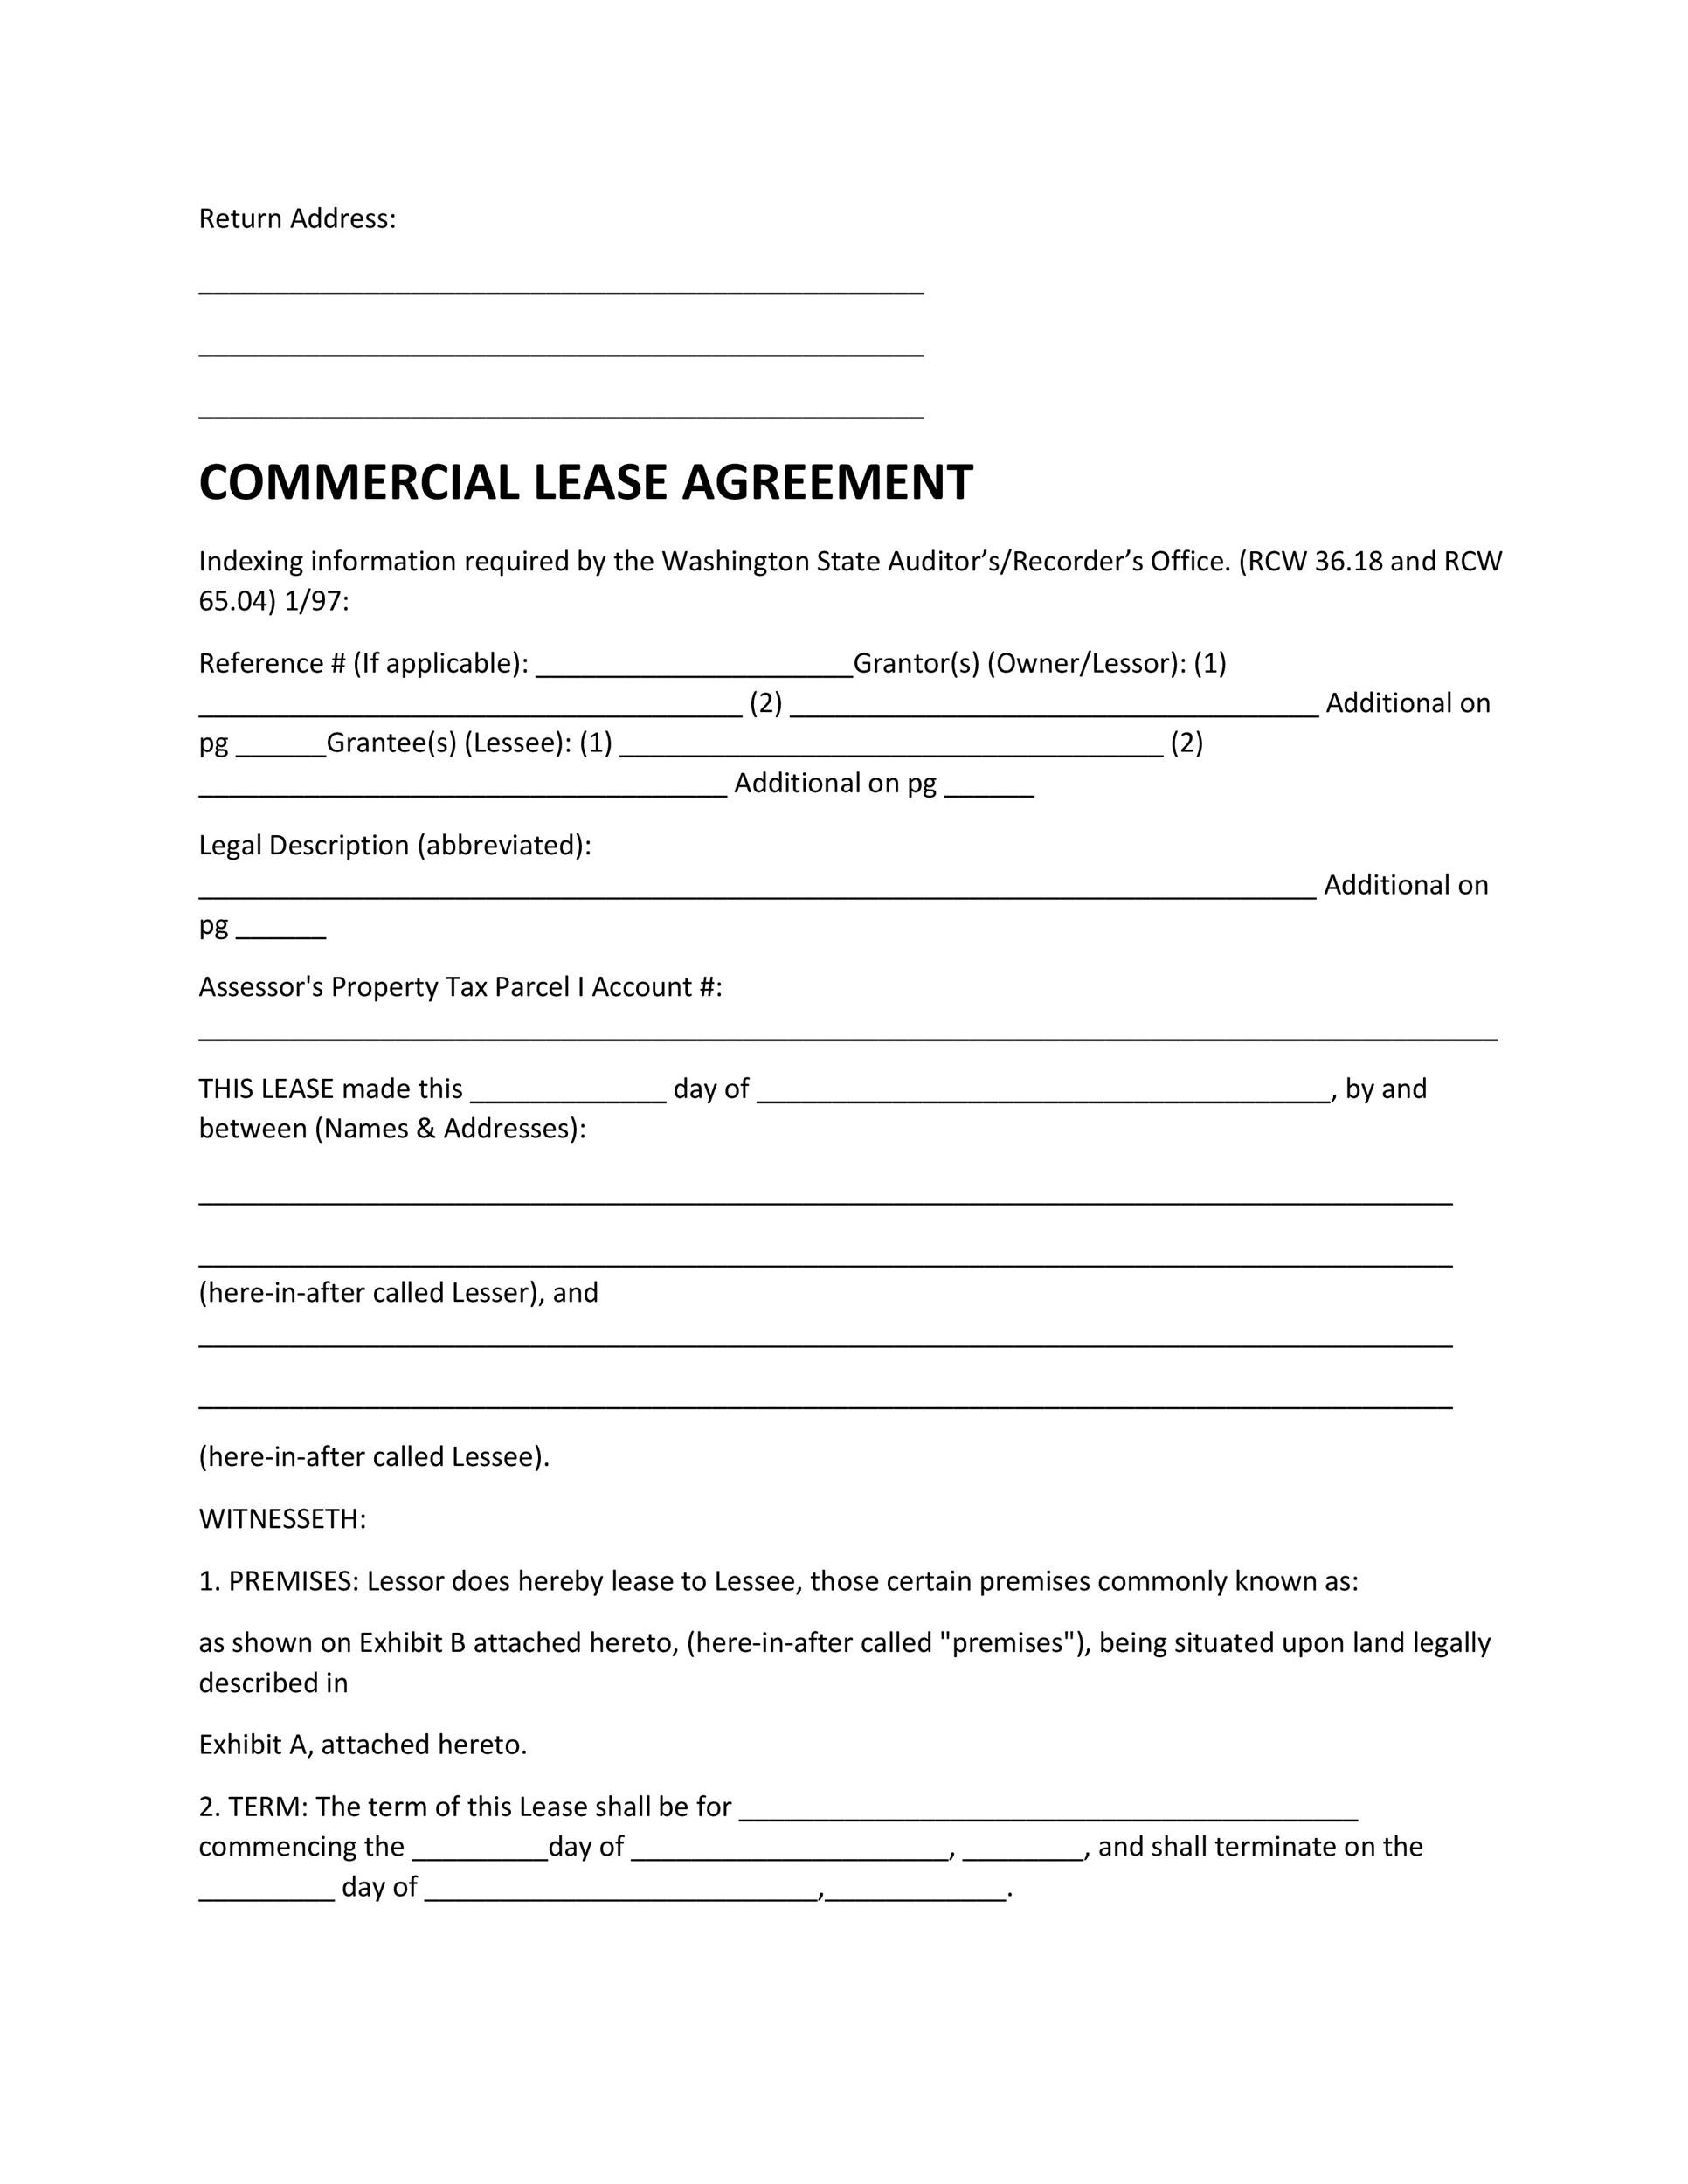 26 Free Commercial Lease Agreement Templates ᐅ TemplateLab